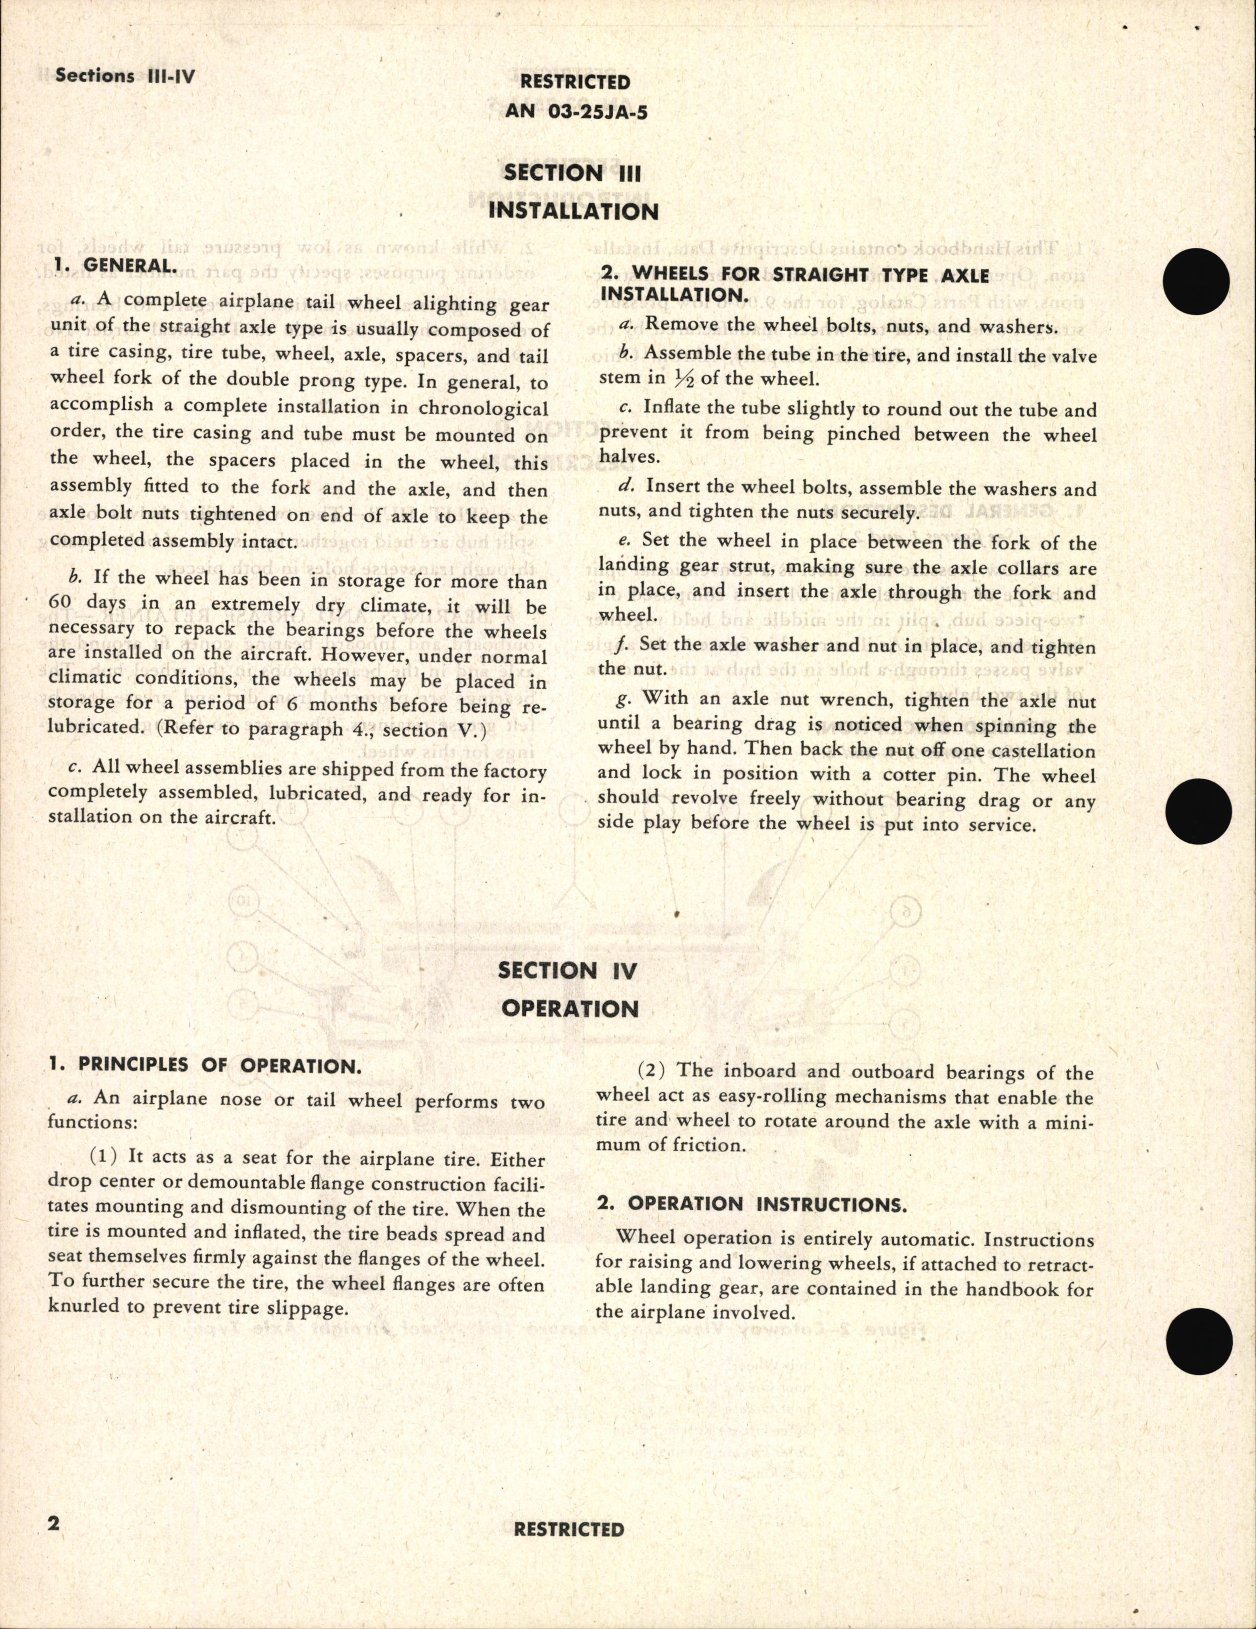 Sample page 6 from AirCorps Library document: Operation, Service, & Overhaul Instructions with Parts Catalog for Low Pressure Tail Wheels